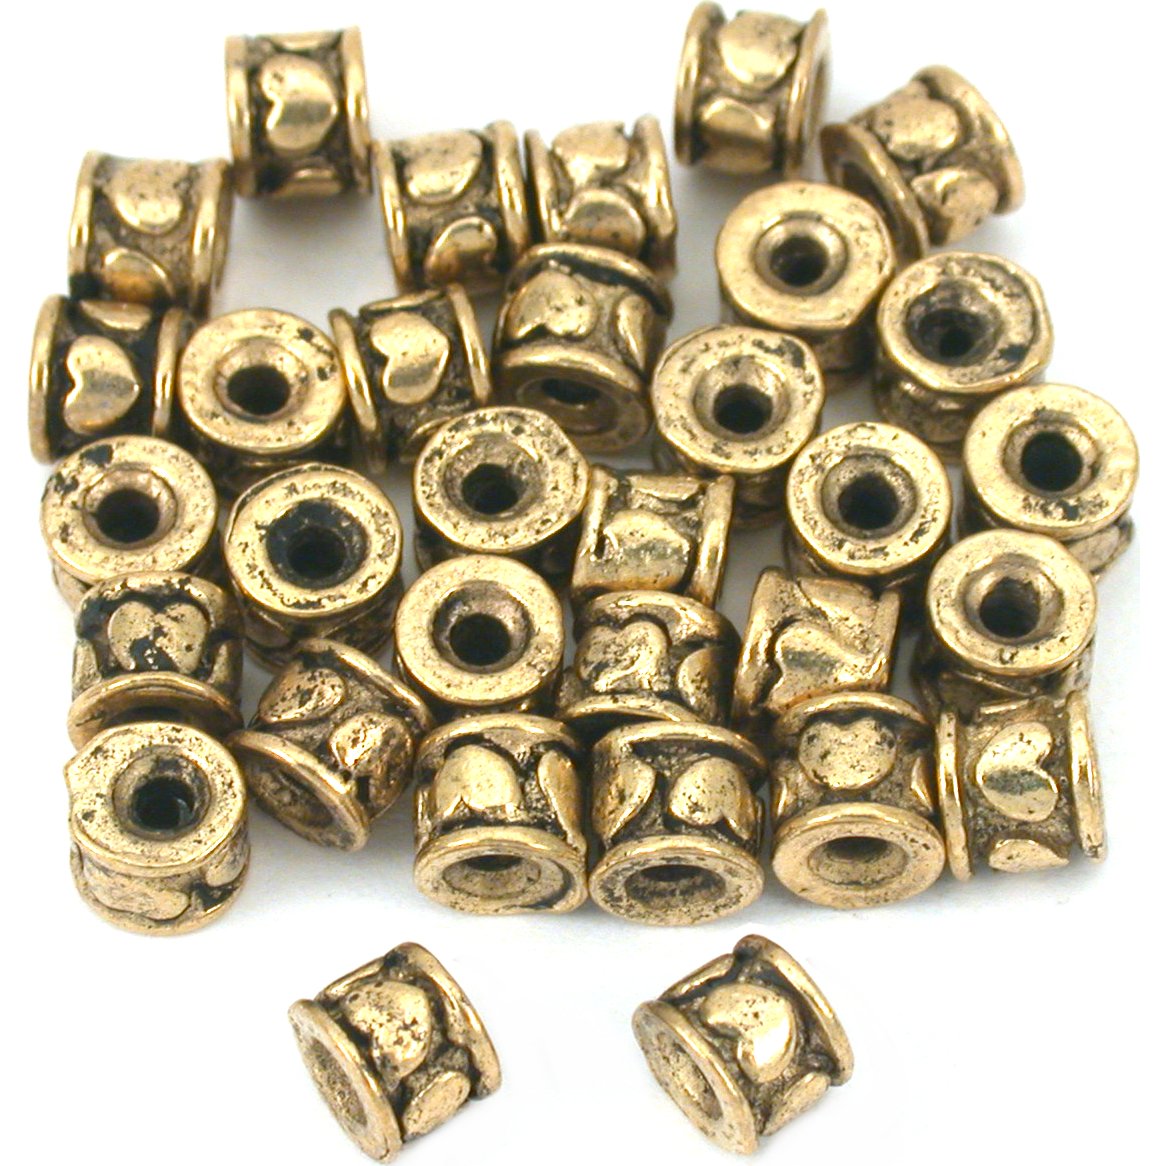 Bali Spacer Heart Antique Gold Plated Beads 5mm 30Pcs Approx.